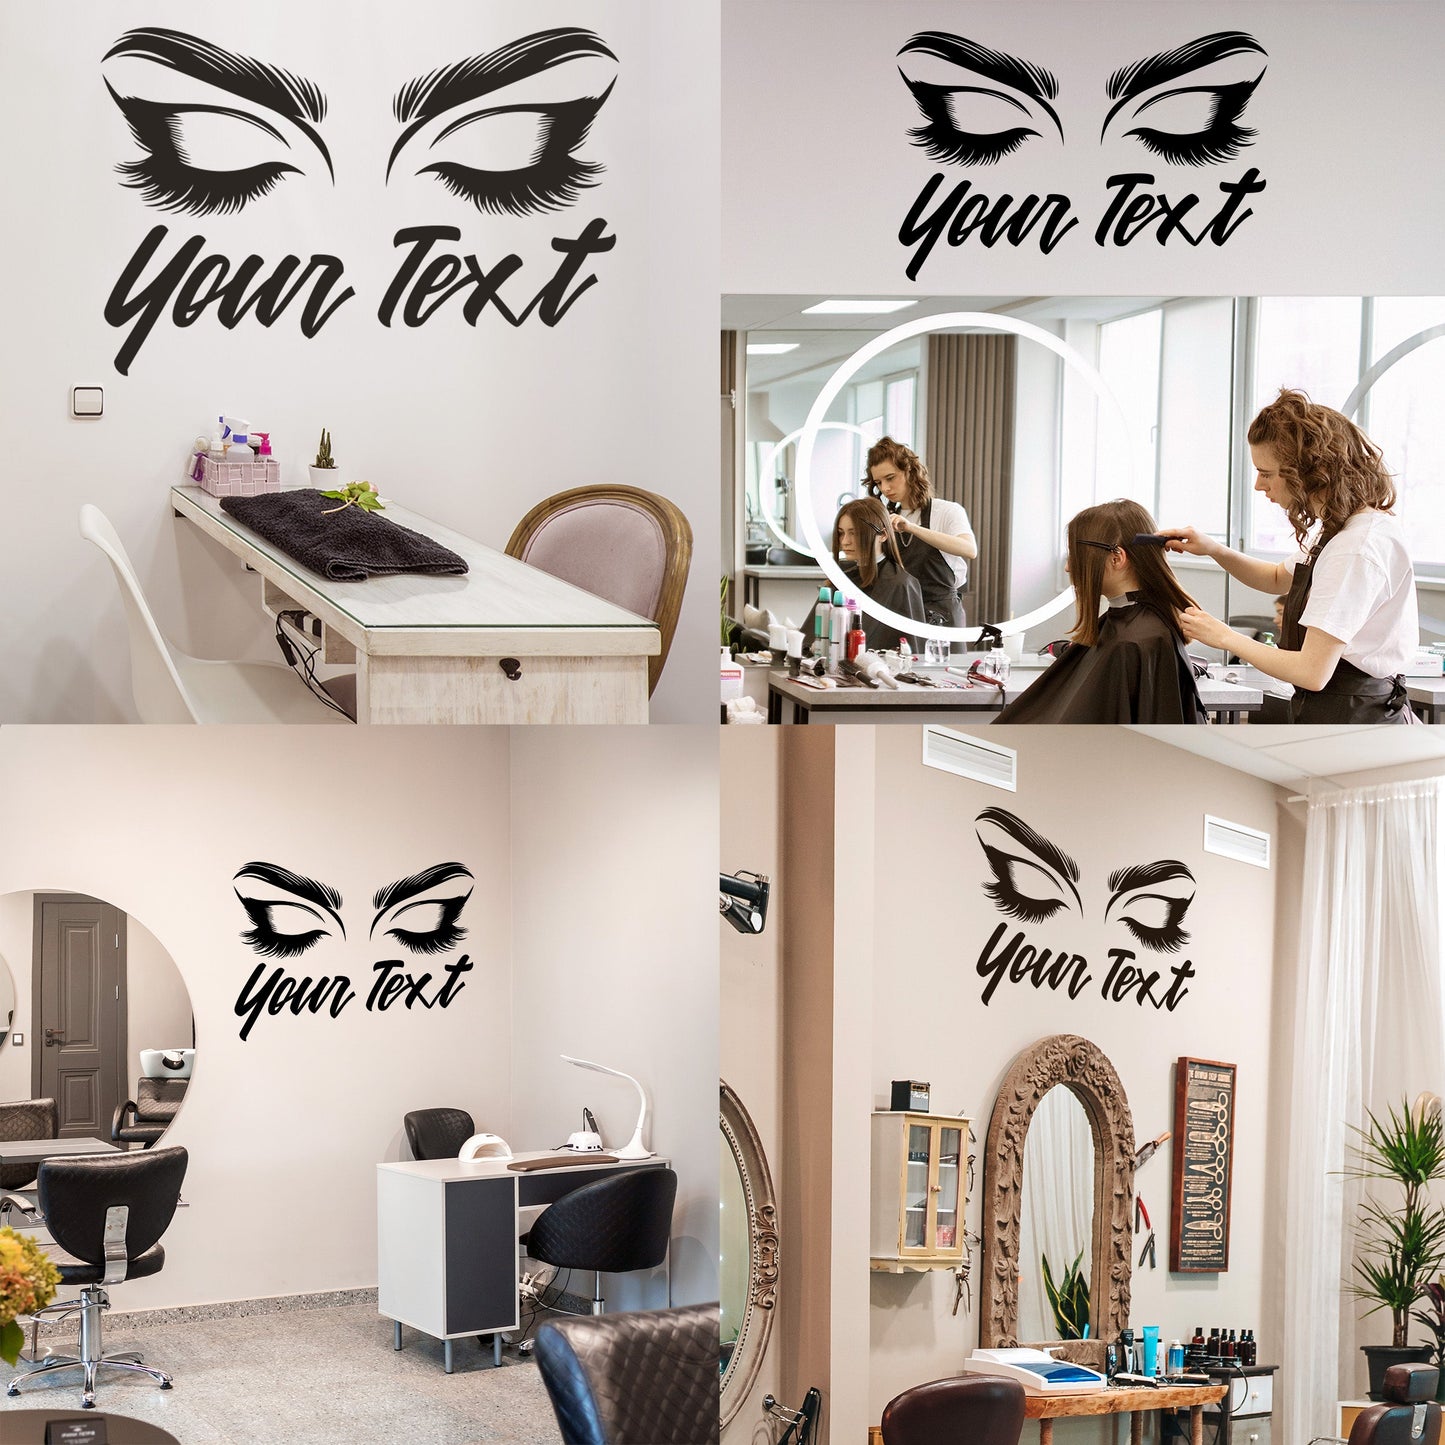 Eye Lash Wall Decal - Make Up Wall Stickers - Eyelash Wall Decals Salon - Make Up Wall Decals - Bedroom Wall Decal - Makeup Decals for Walls